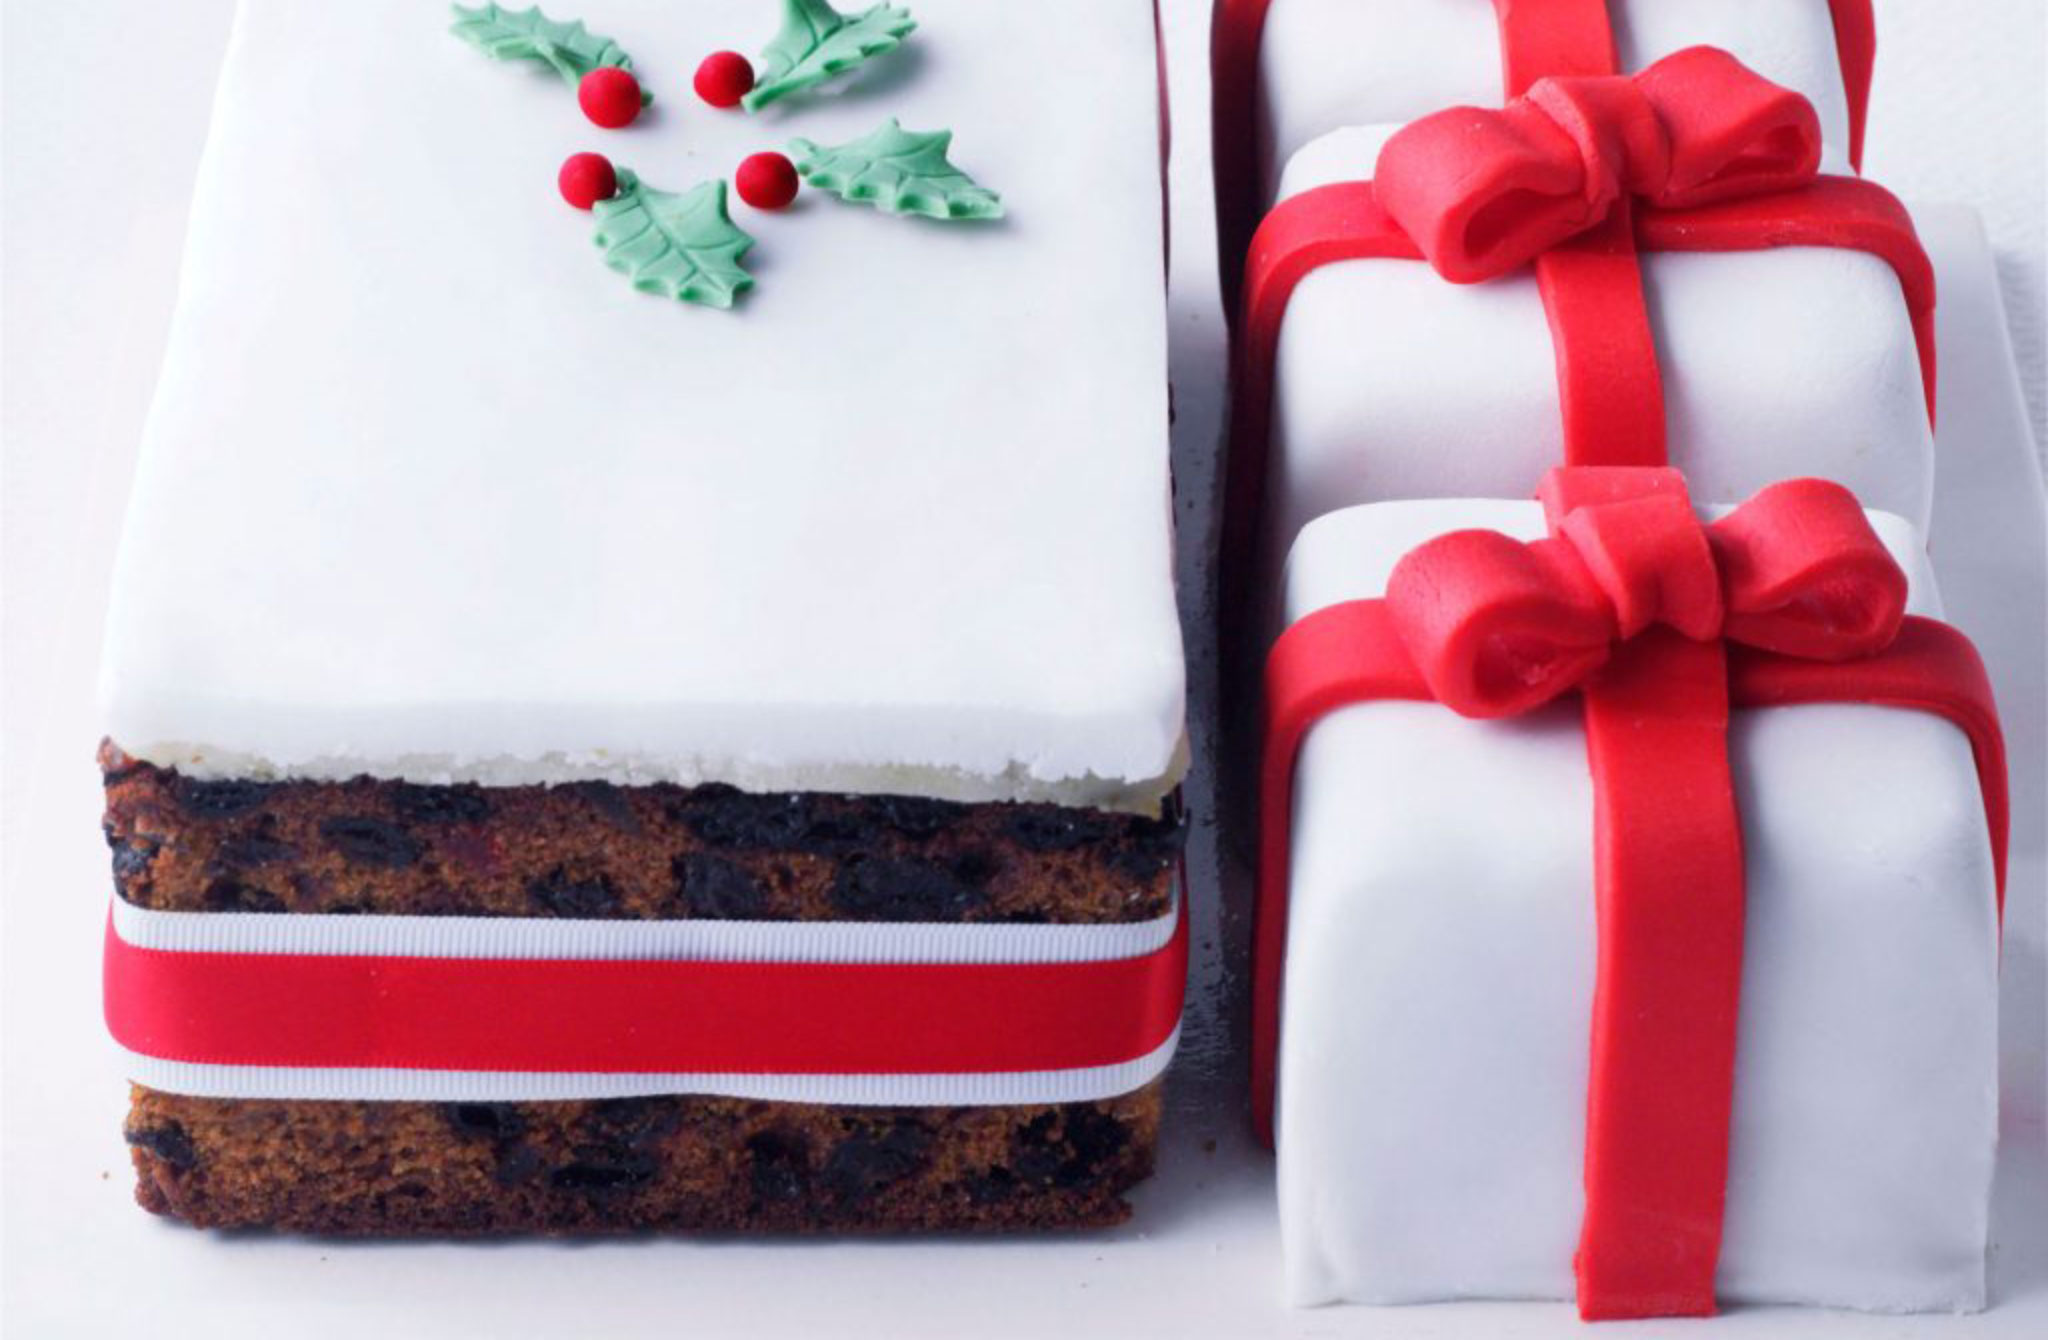 Christmas cakes and gifts